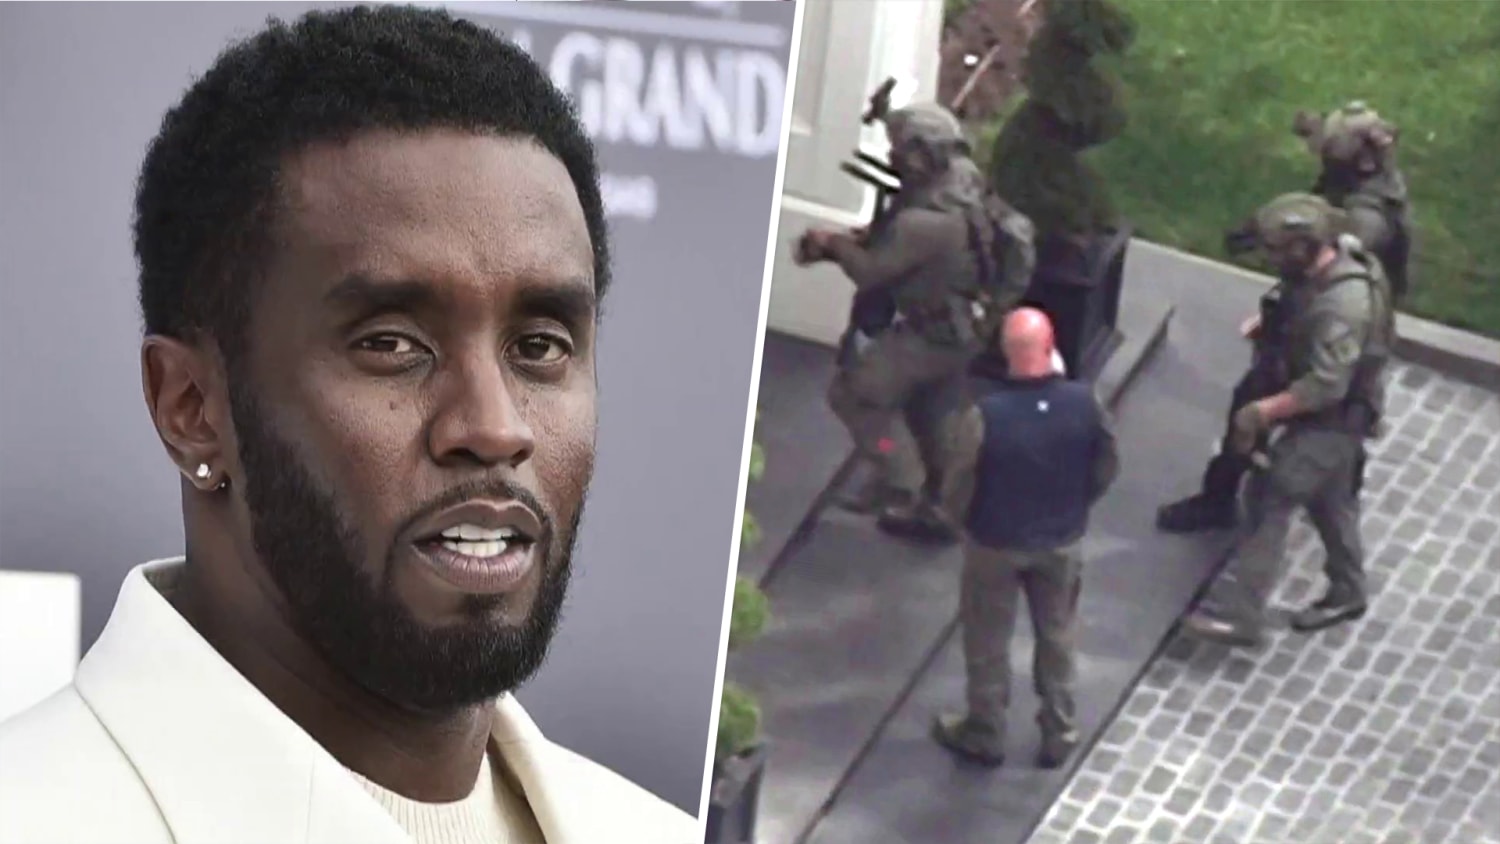 Sean Combs’ homes raided by federal agents